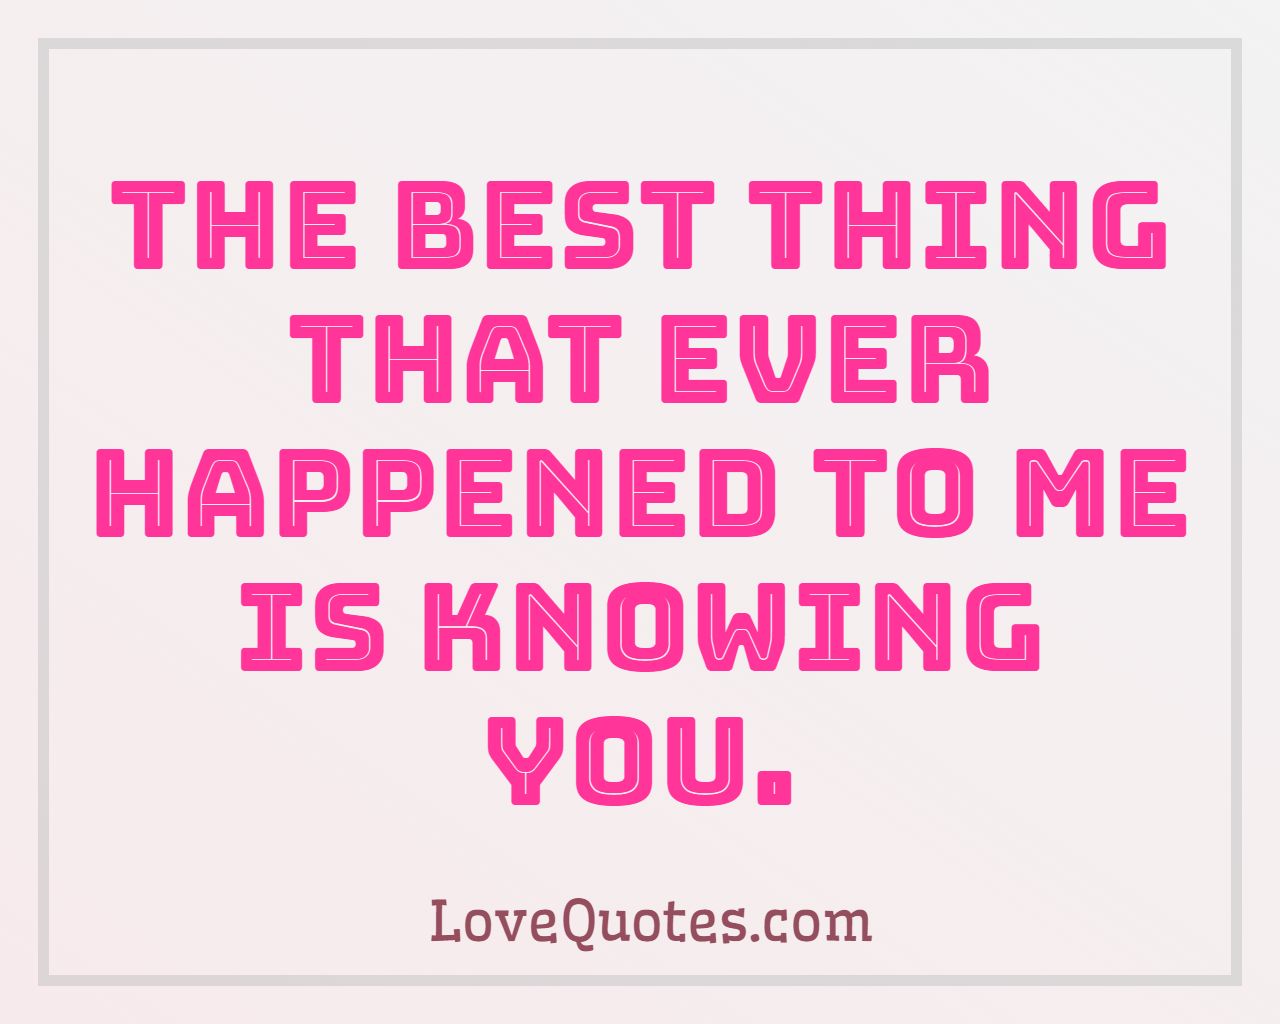 Knowing You - Love Quotes